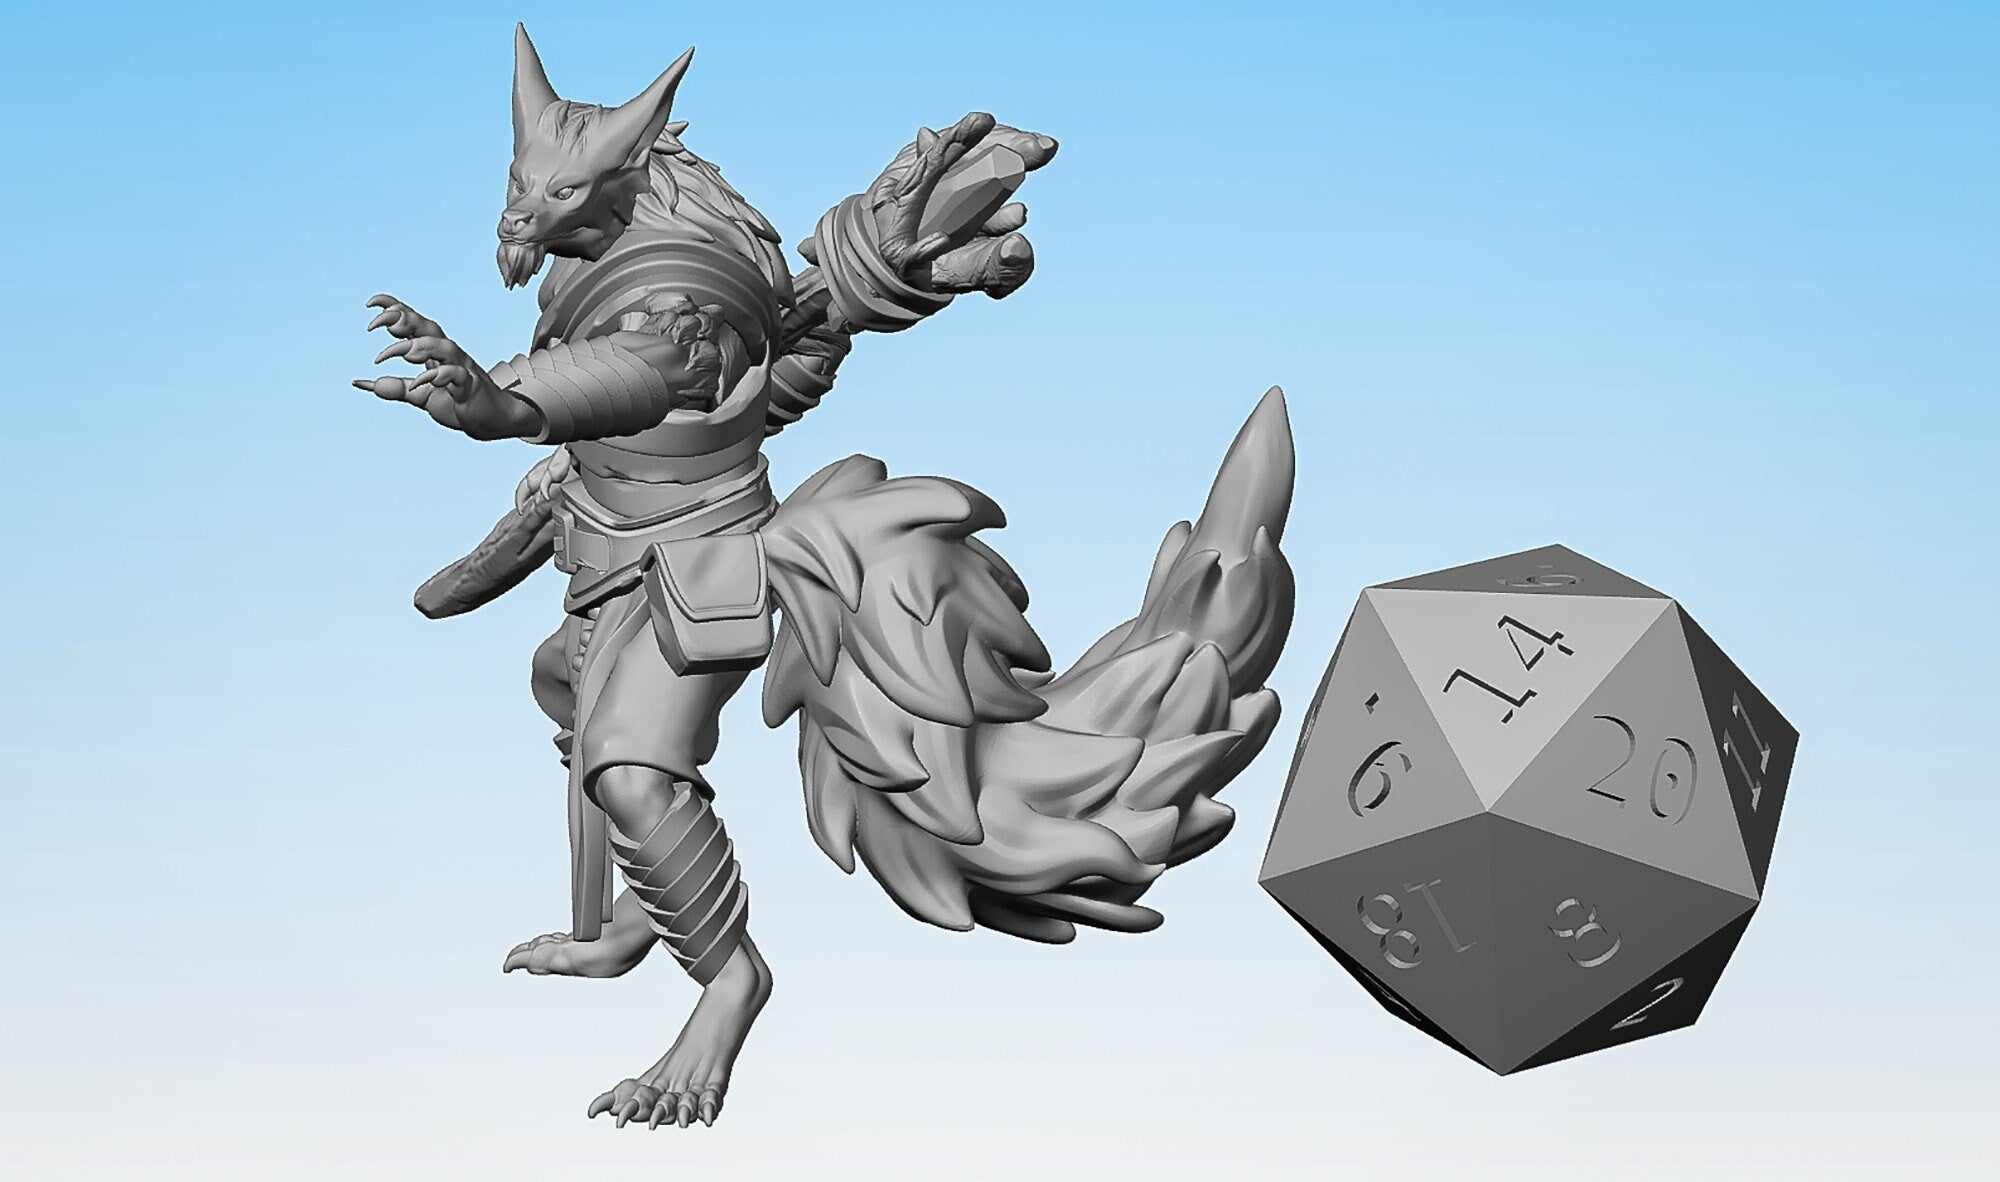 FOXKIN (A) "Monk" KITSUNE | Dungeons and Dragons | DnD | Pathfinder | Tabletop | RPG | Hero Size | 28 mm-Role Playing Miniatures